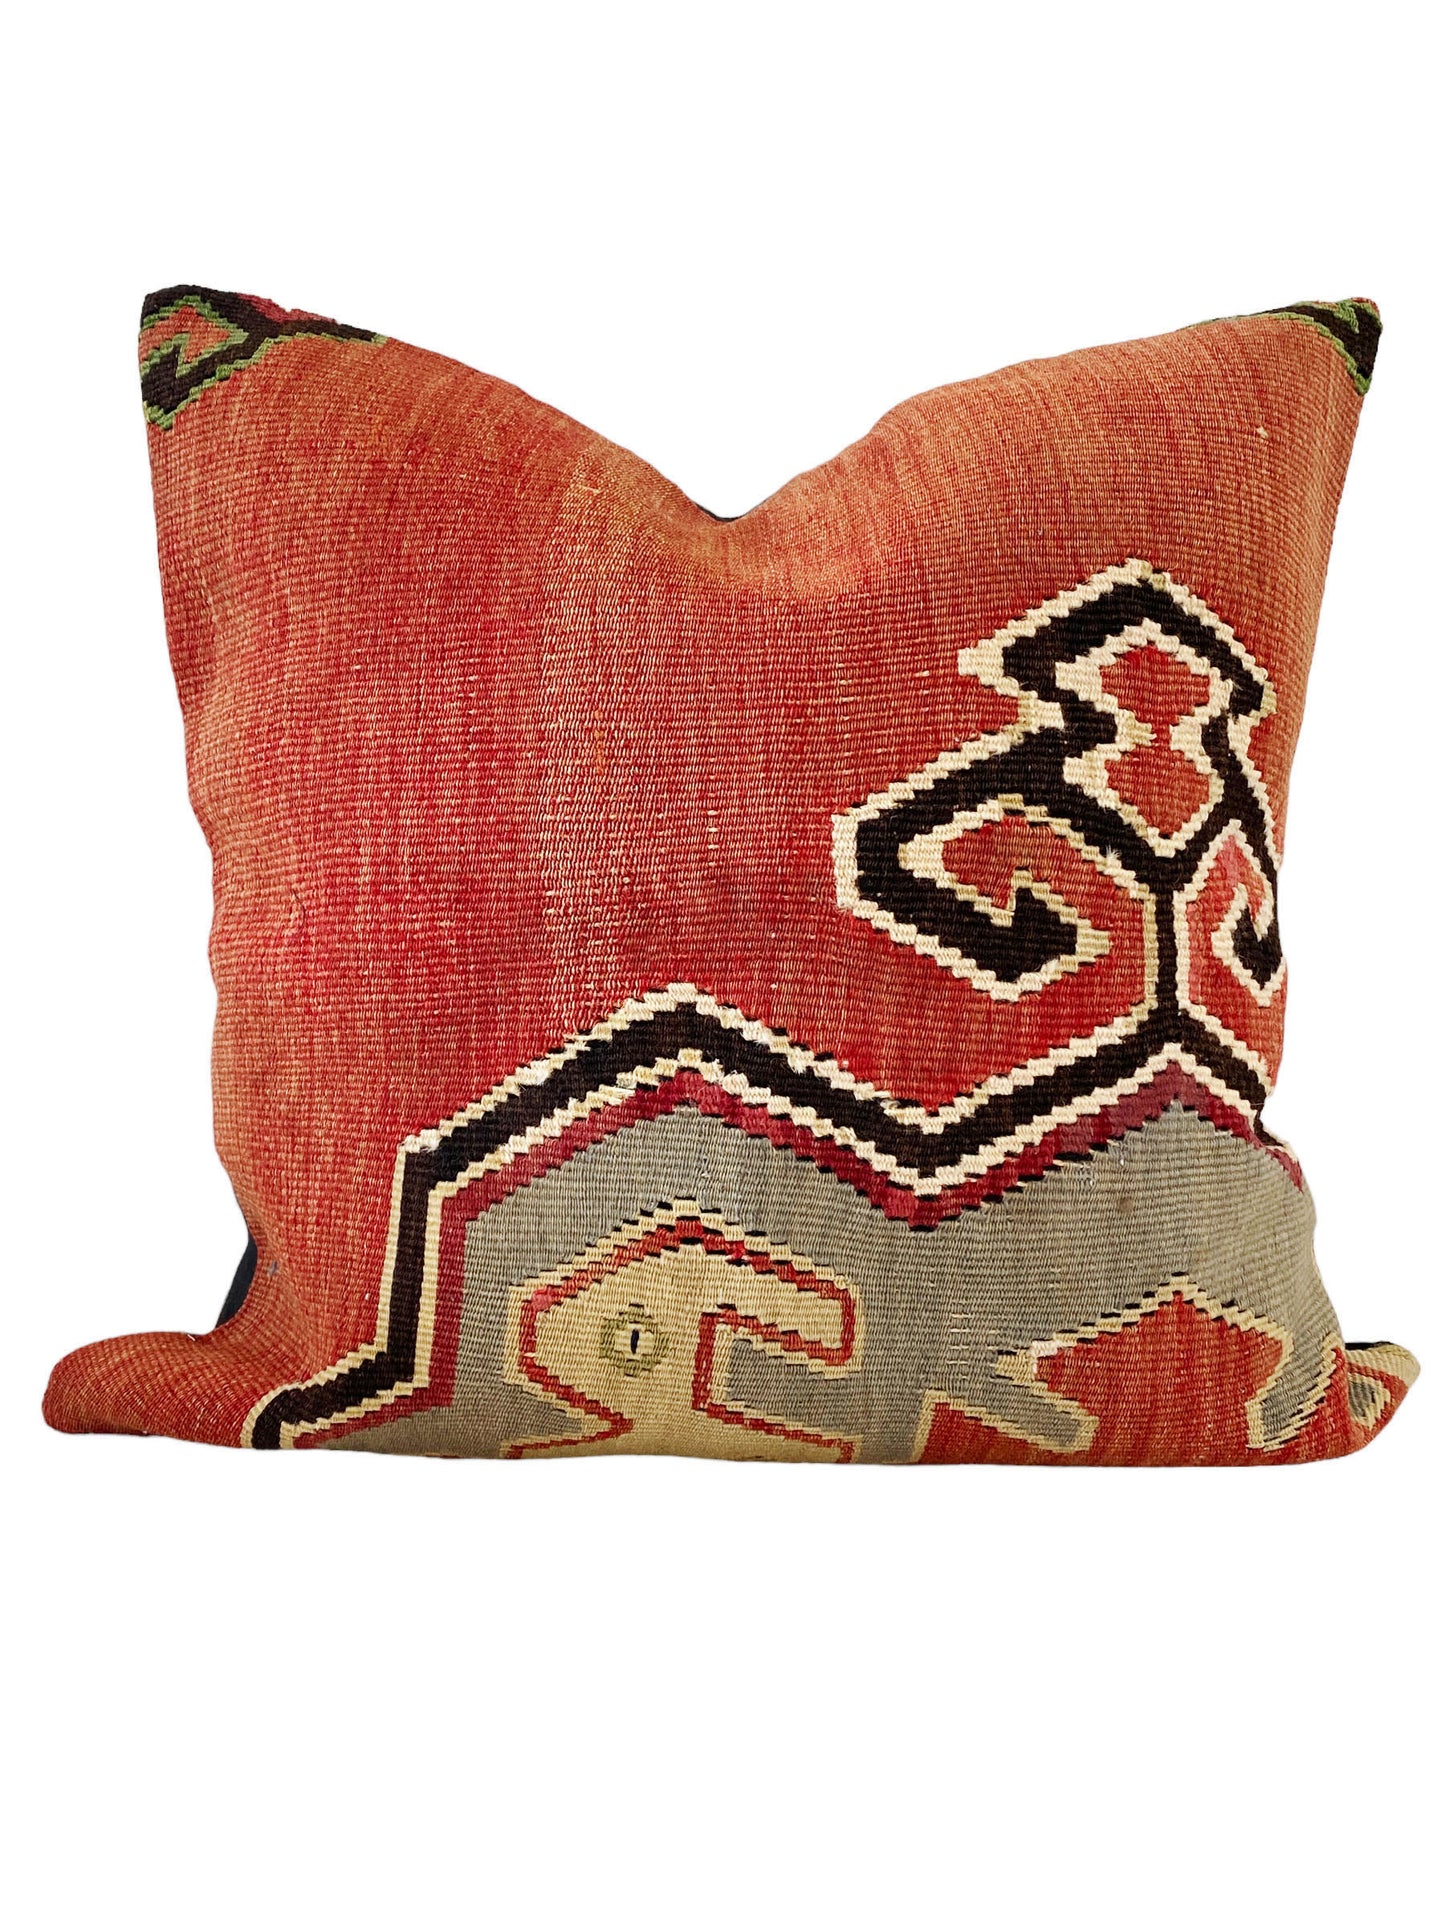 #5604 Superb Custom Made Old Turkish  Tribal Kilim Pillow Cover 20" by 20"